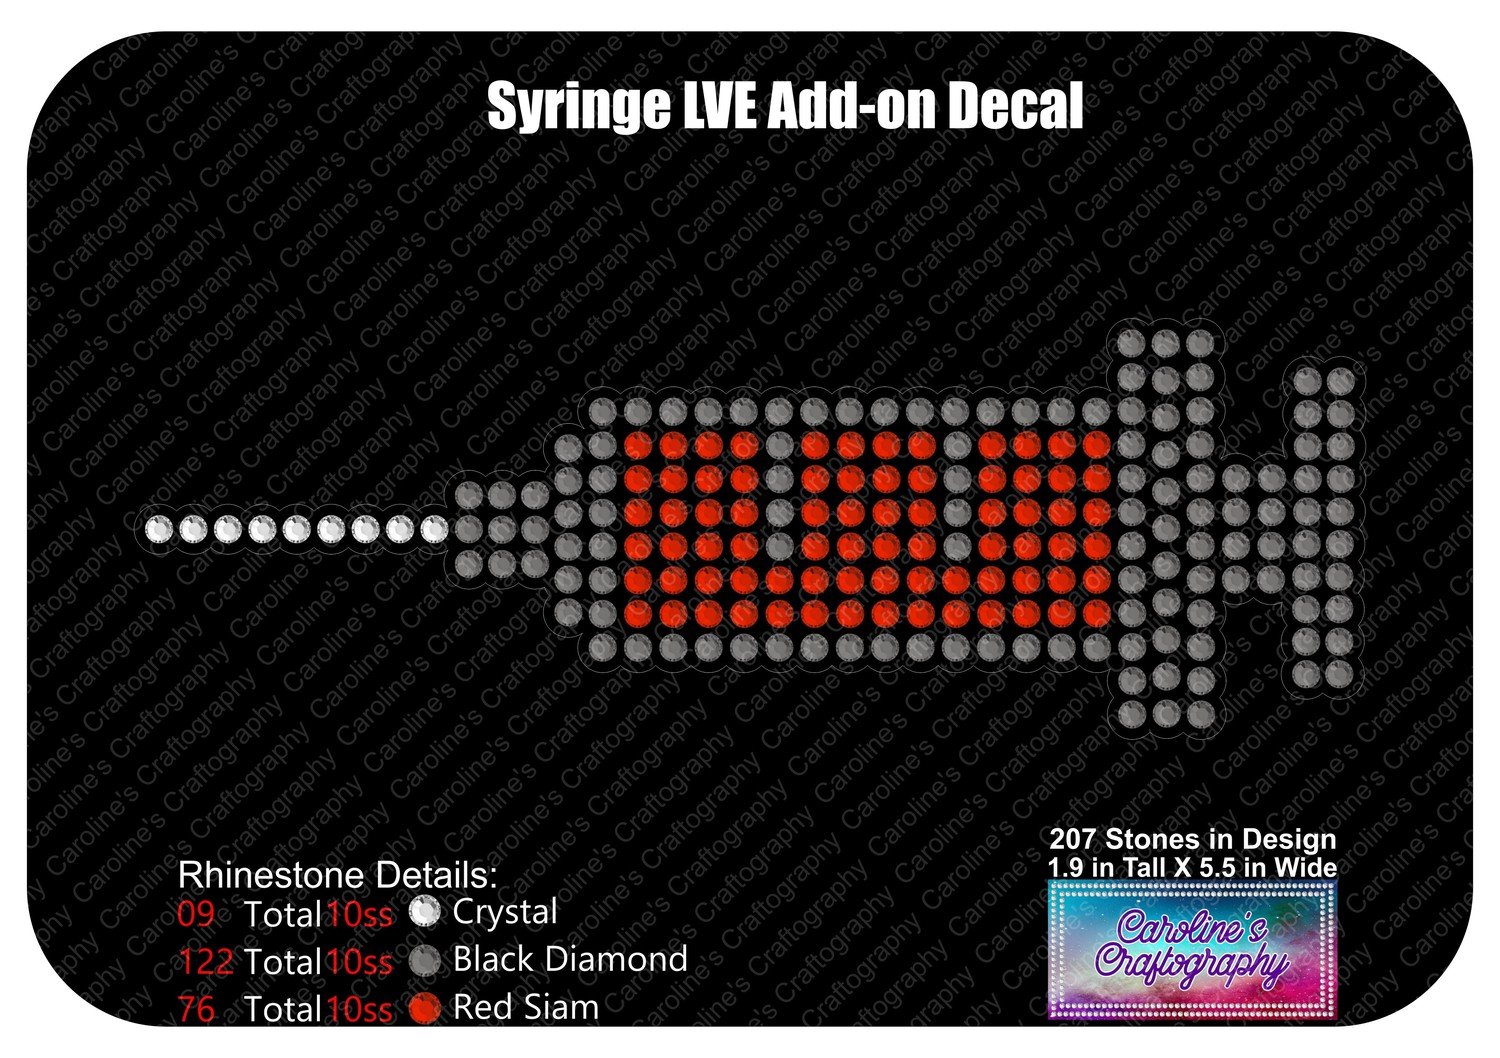 Syringe LVE Add-on and Decal